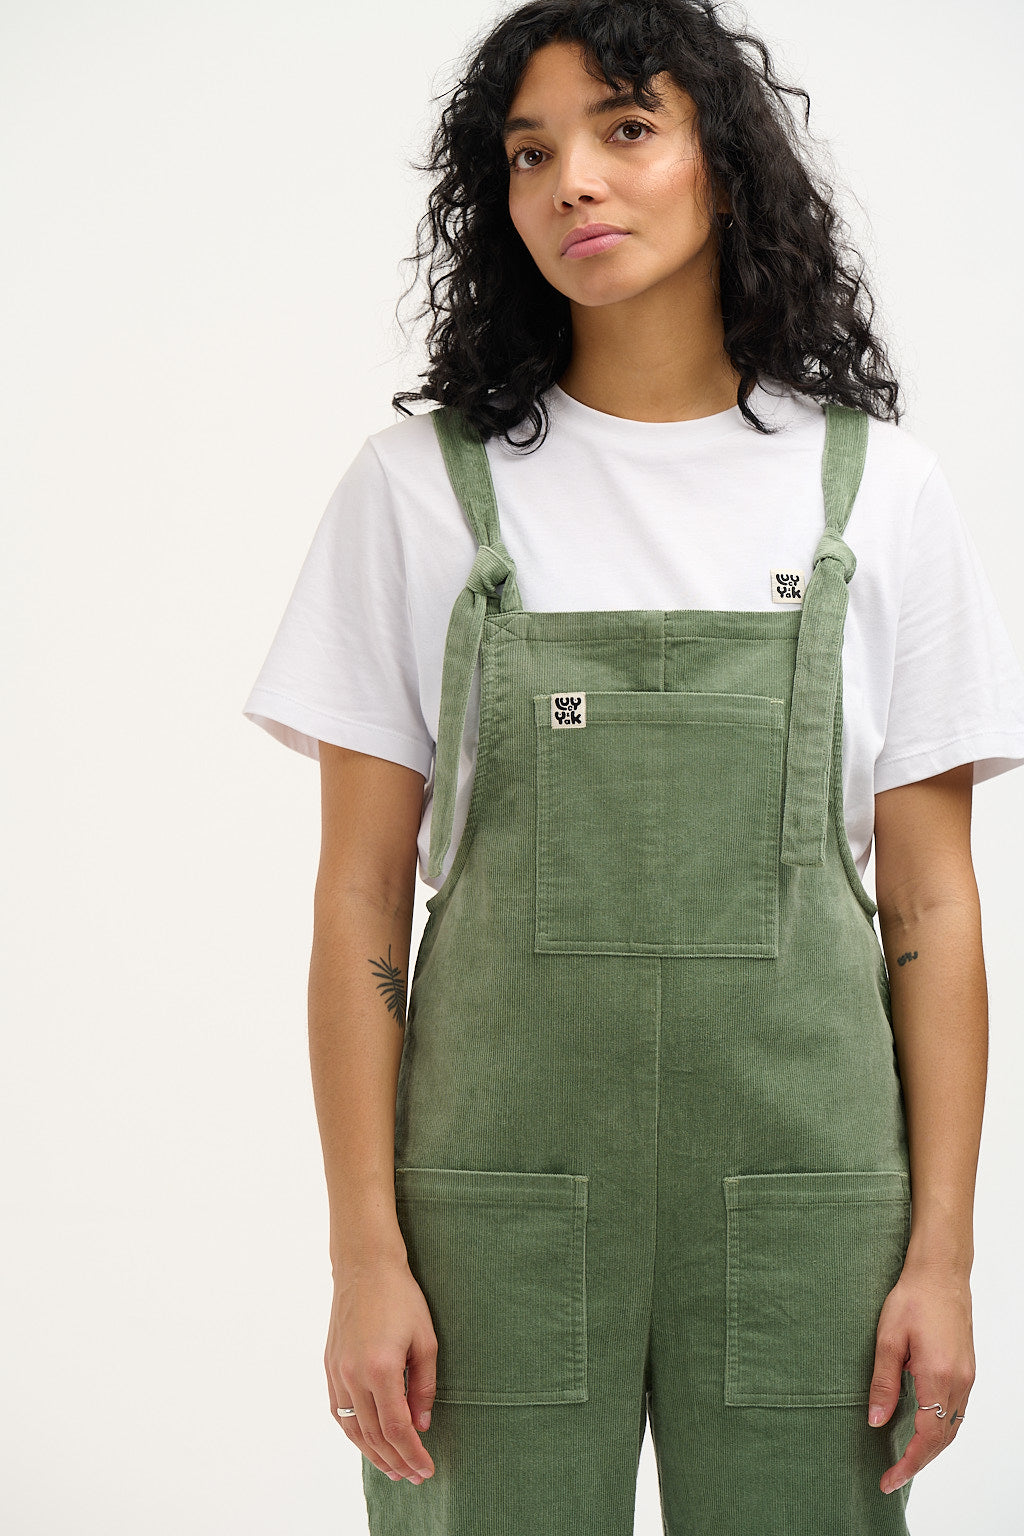 Winter Green Babycord Peggy Pocket Dungaree Dress - GOTS Certified Org